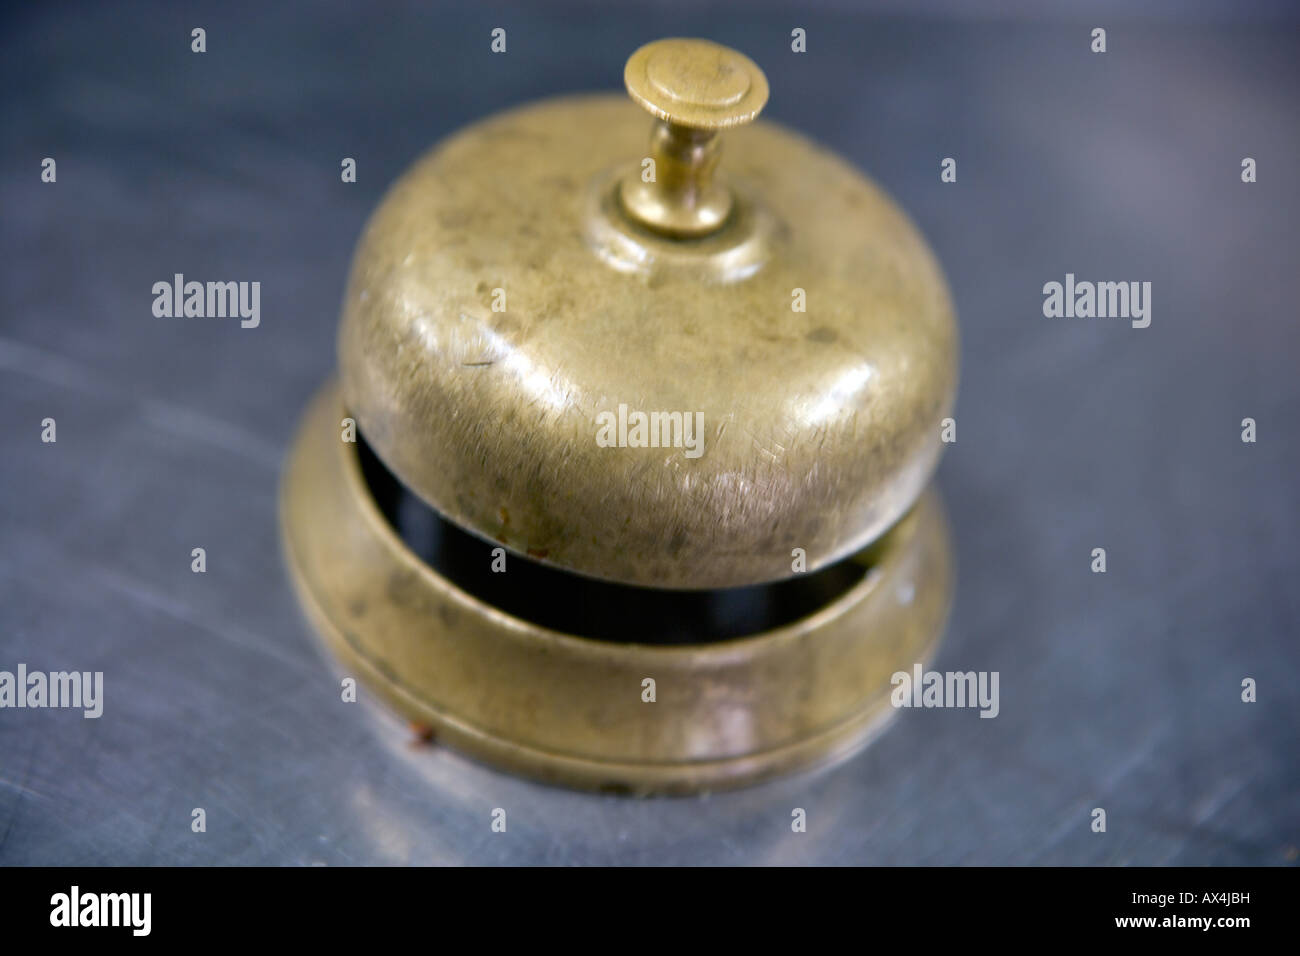 a bell at the table Stock Photo